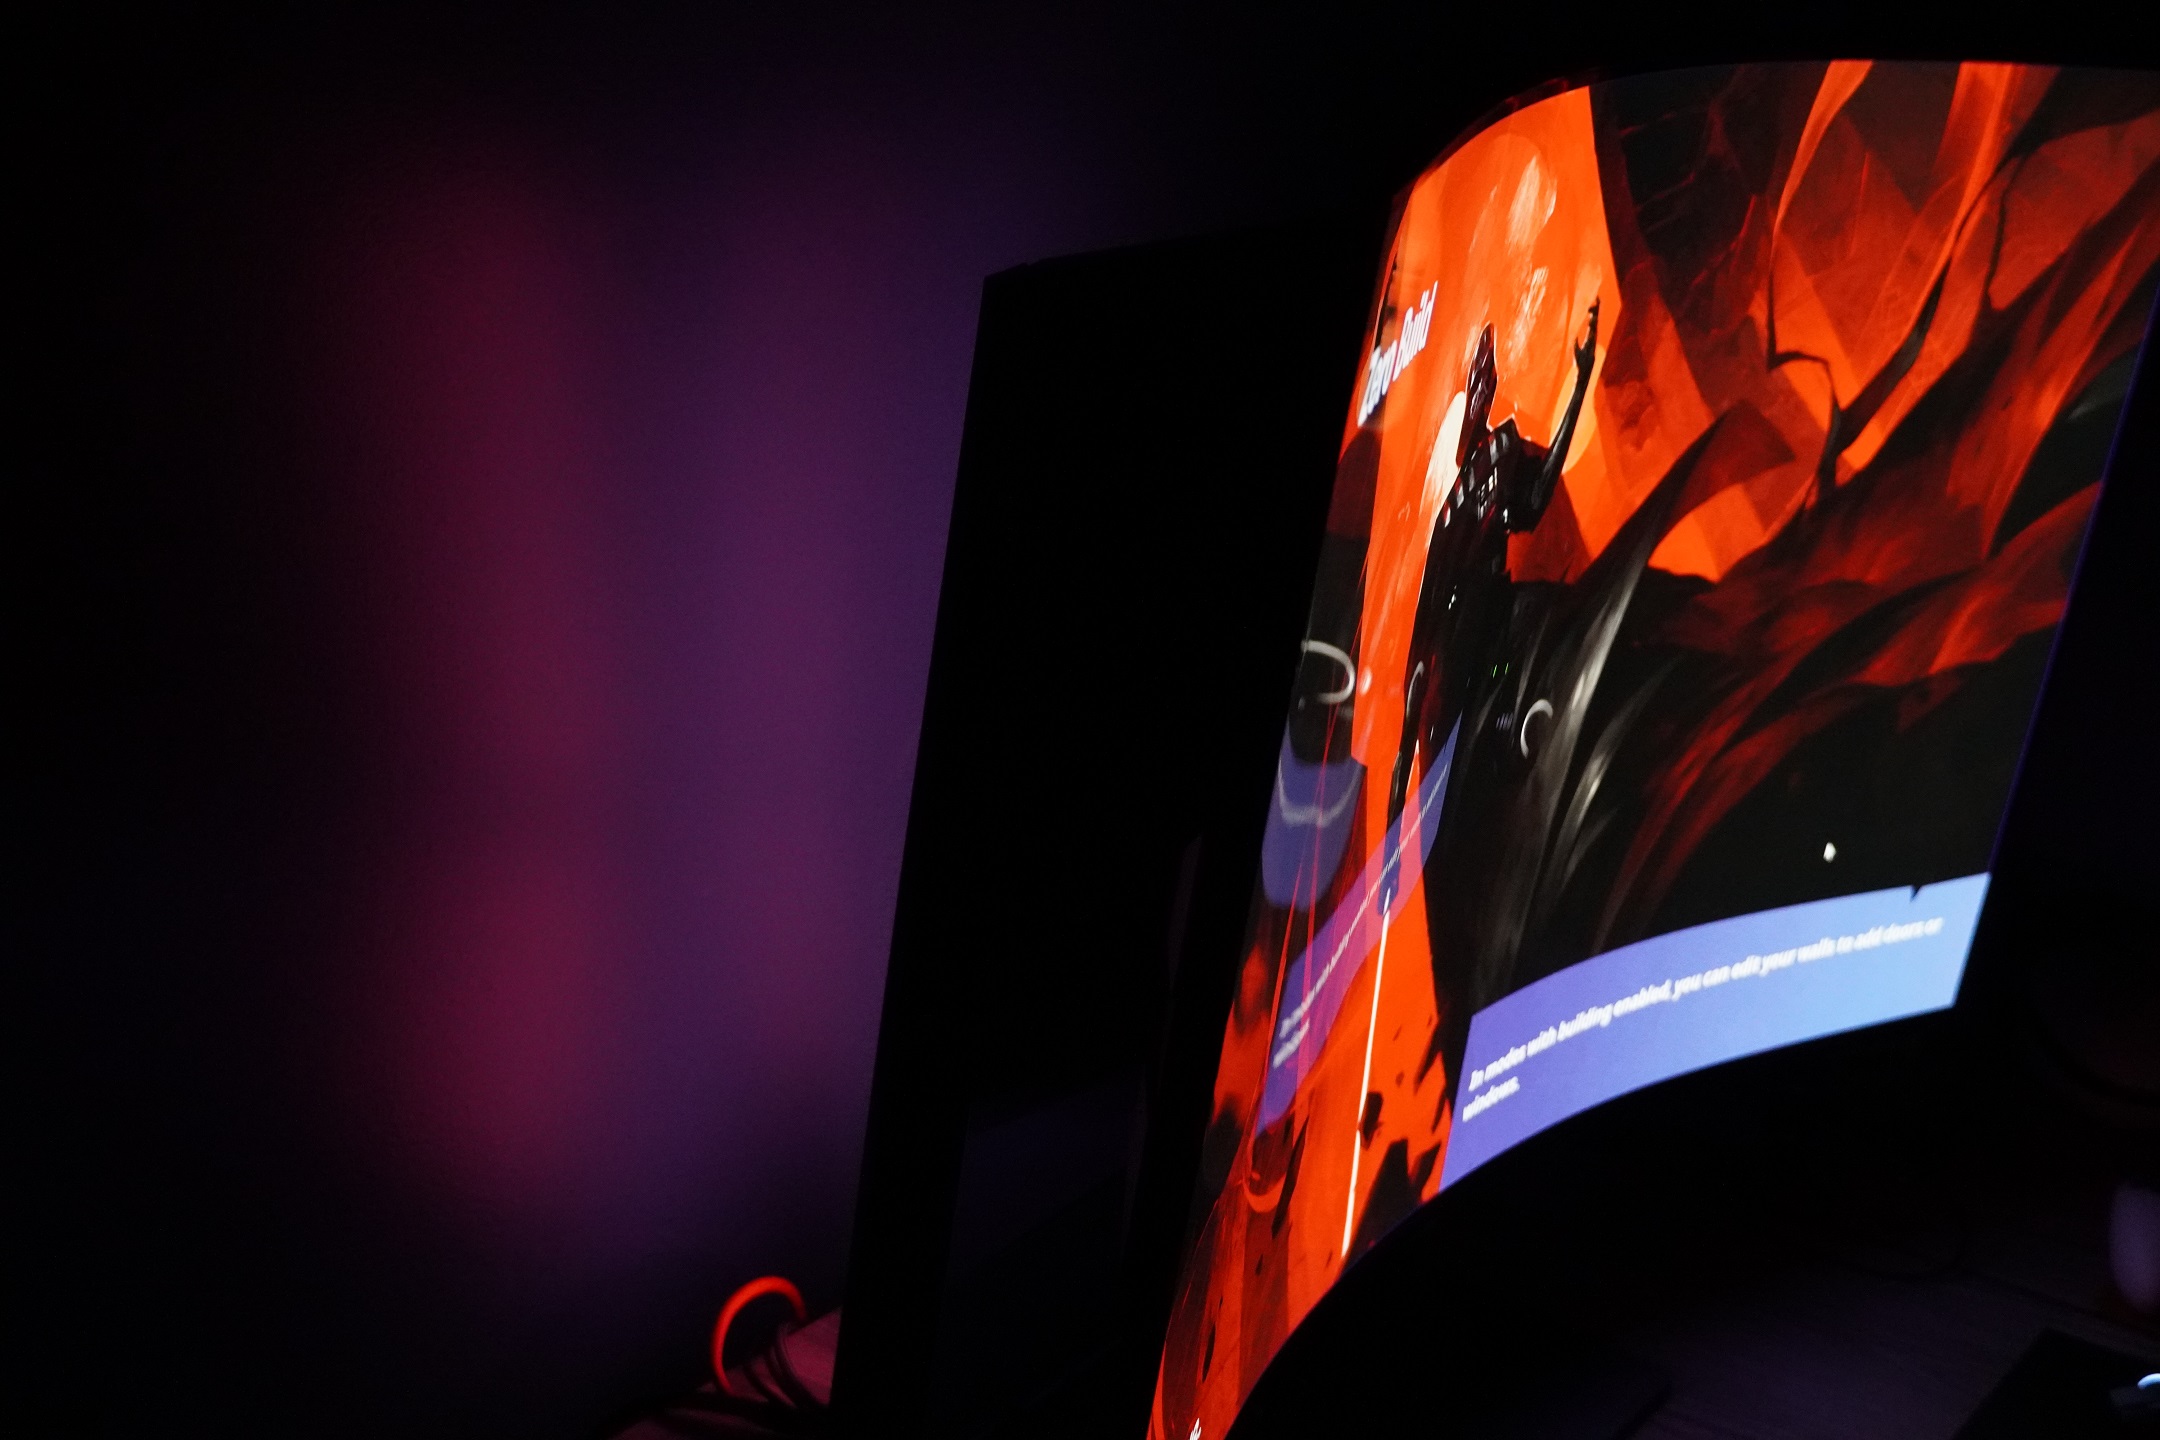 A pale wash of red light spills from the darkened shape of a monitor stand against a wall while the screen shows an image of Darth Vader against a red backdrop